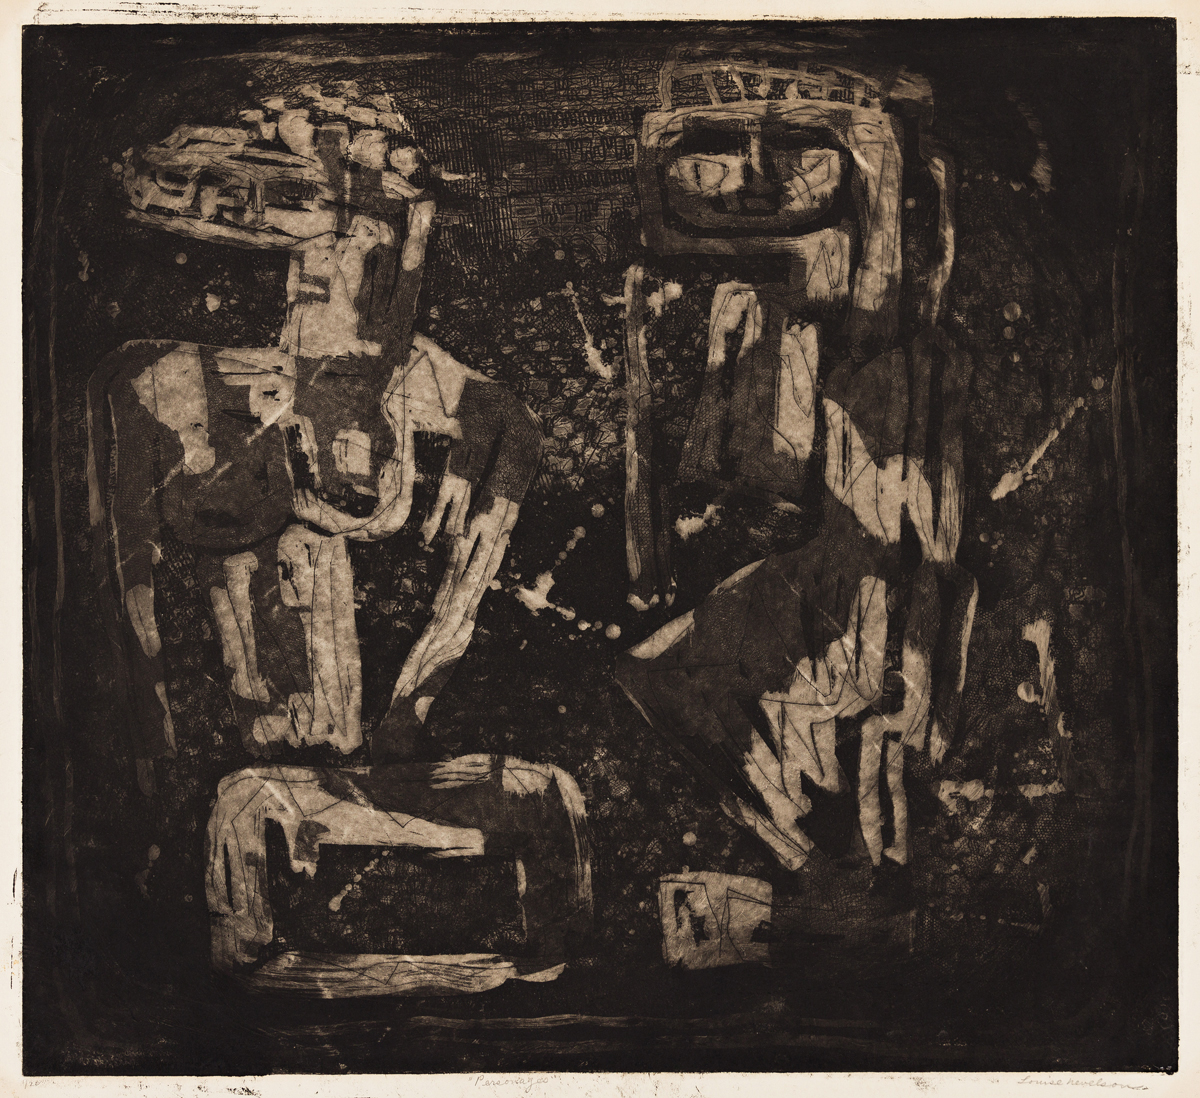 LOUISE NEVELSON One Ancient Figures.